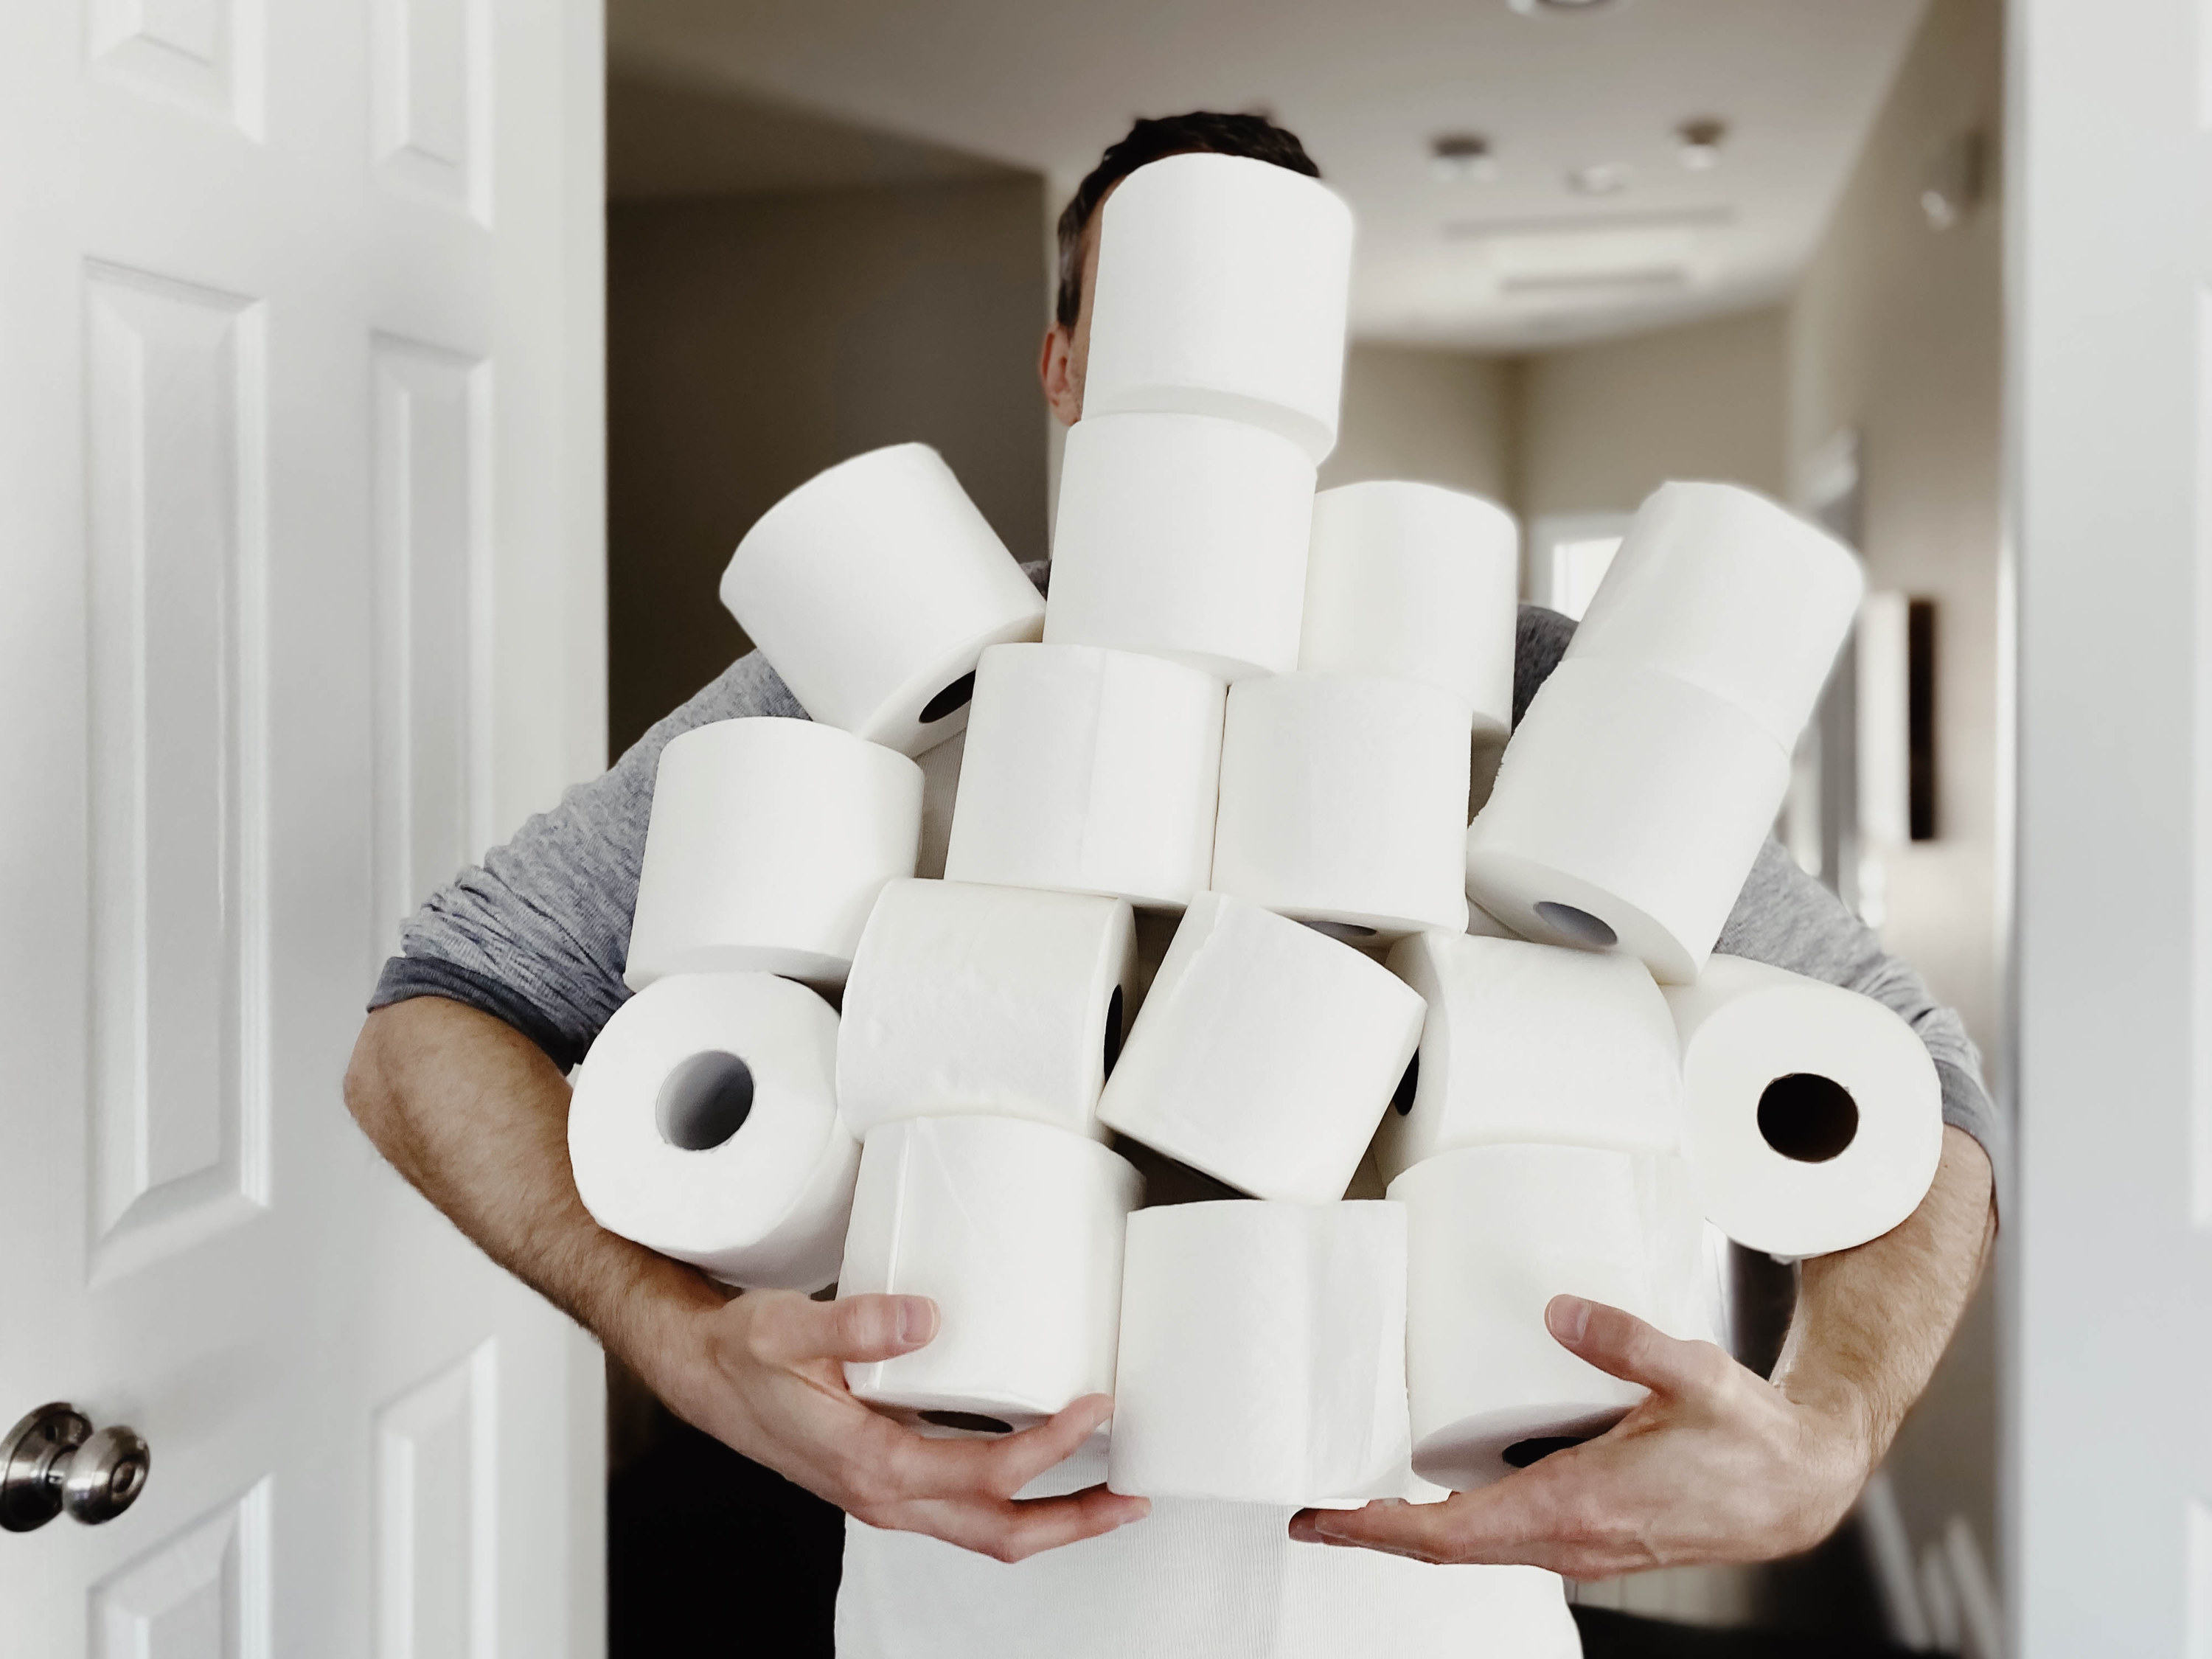 close-up of unrecognizable man carrying an abundance of toilet paper